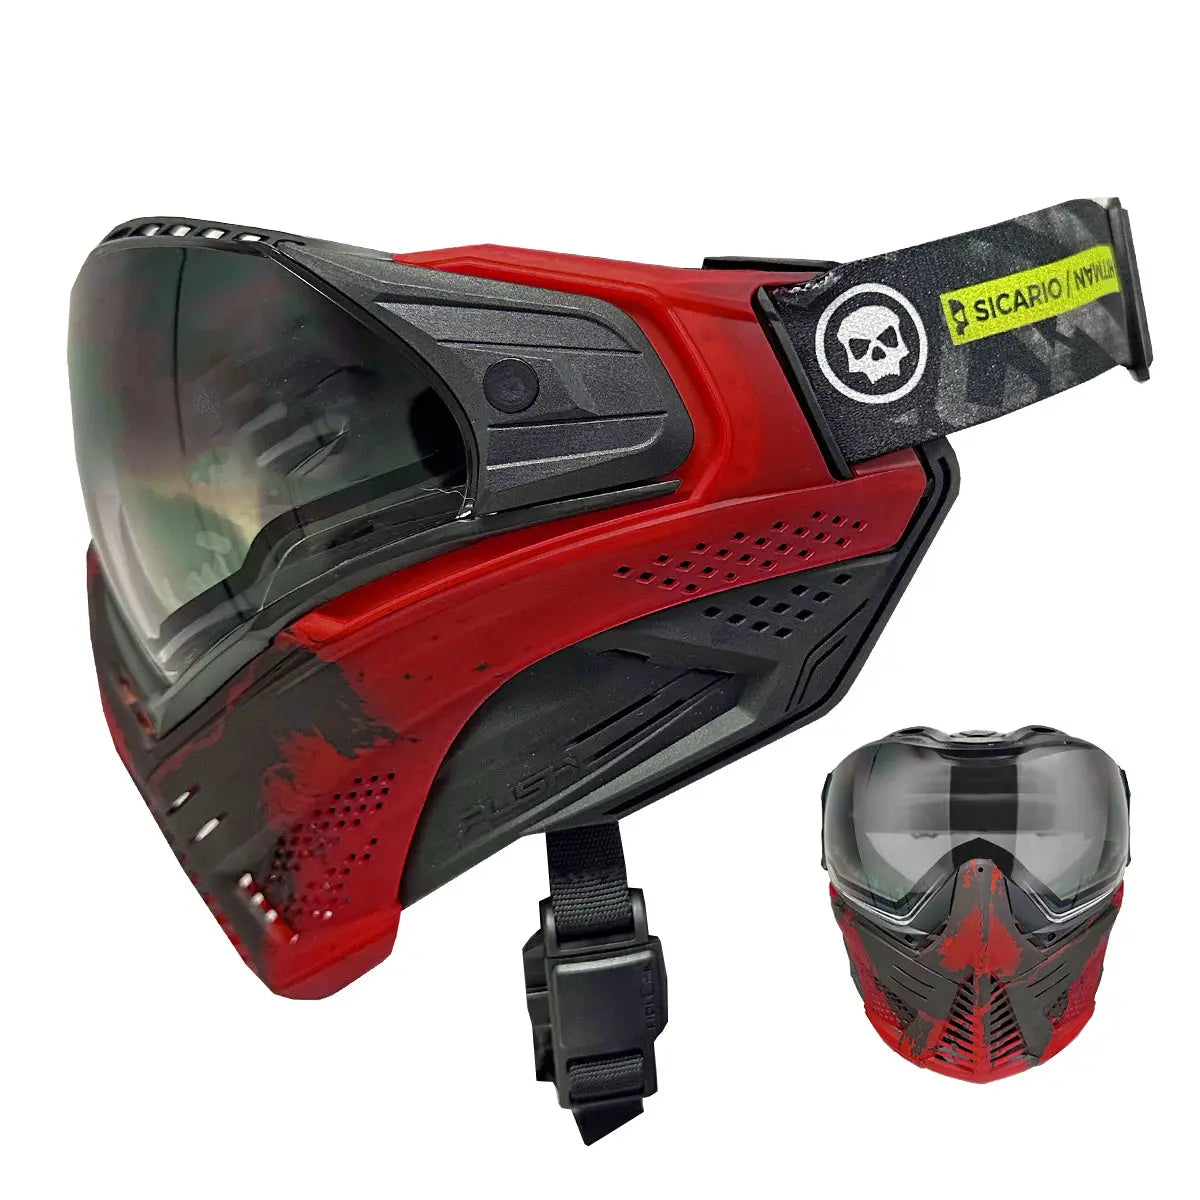 INFAMOUS PUSH UNITE GOGGLE- BLOODY MARY (LIMITED EDITION) Push Paintball